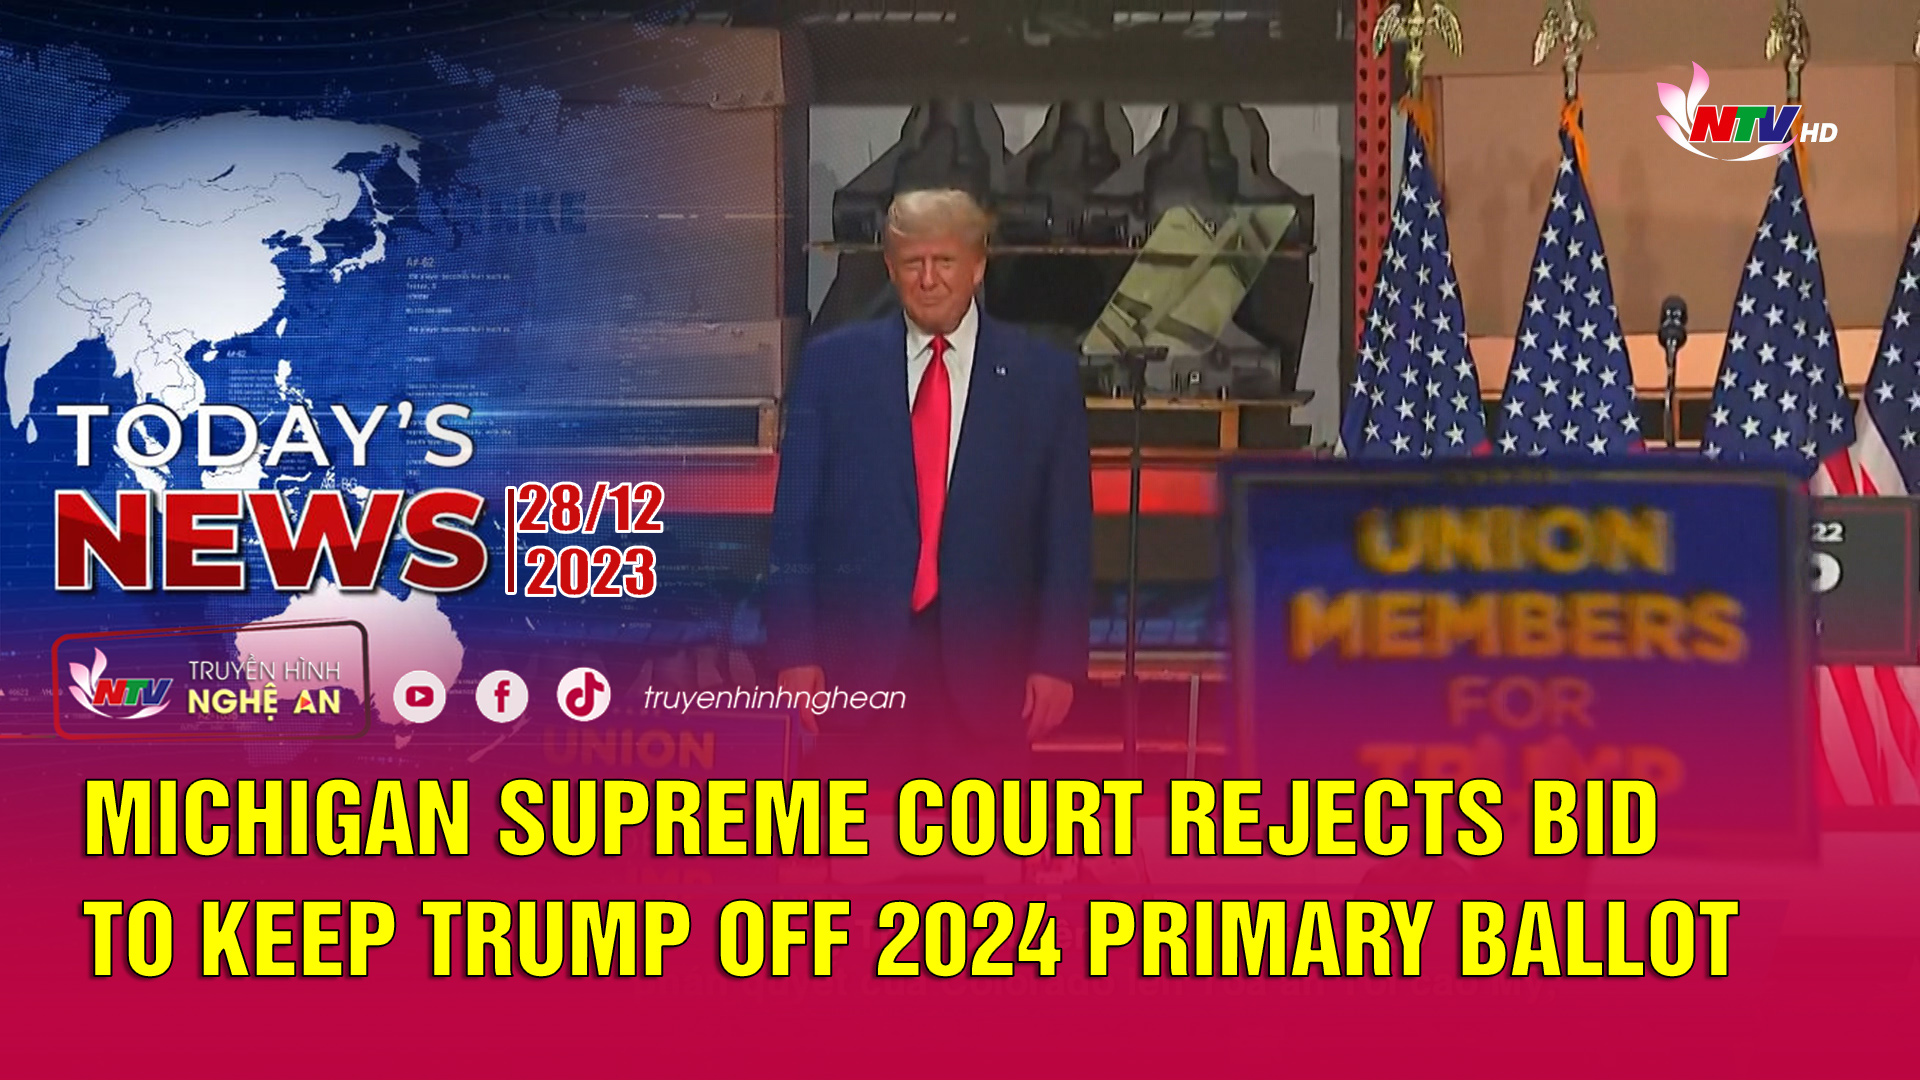 Today's News - 28/12/2023: Michigan Supreme Court rejects bid to keep Trump off 2024 primary ballot